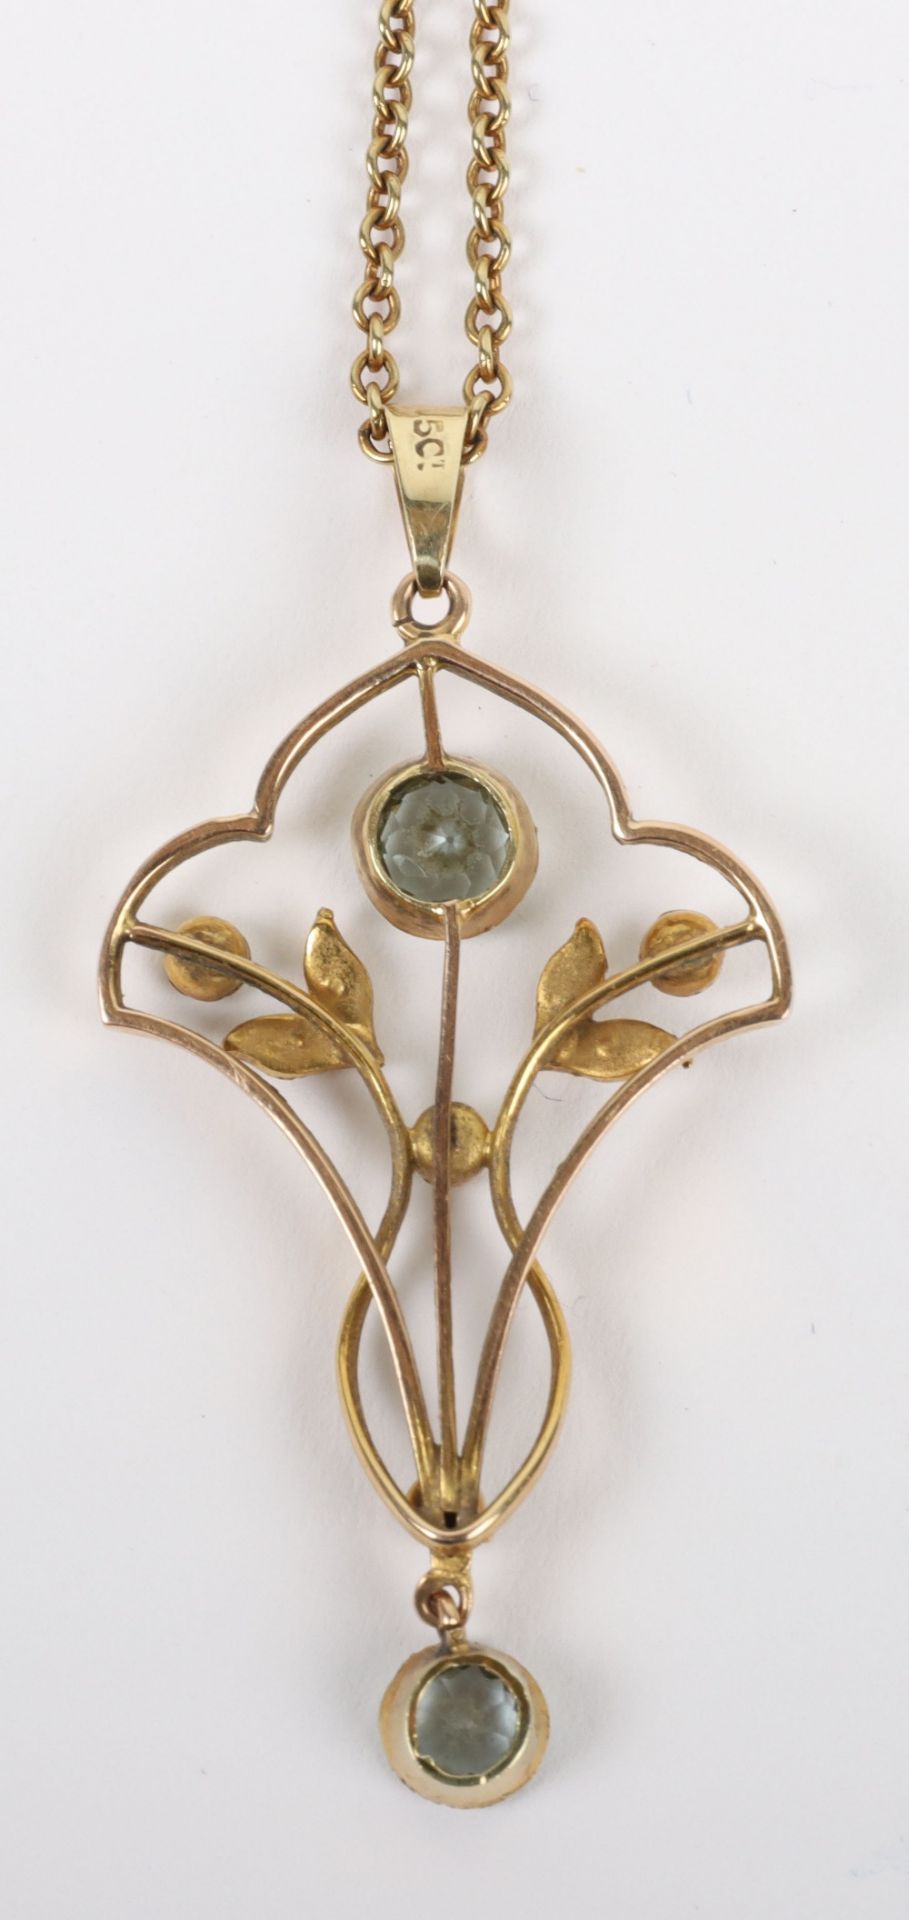 An Art Nouveau 15ct gold, aquamarine and pearl open work pendant necklace - Image 5 of 5